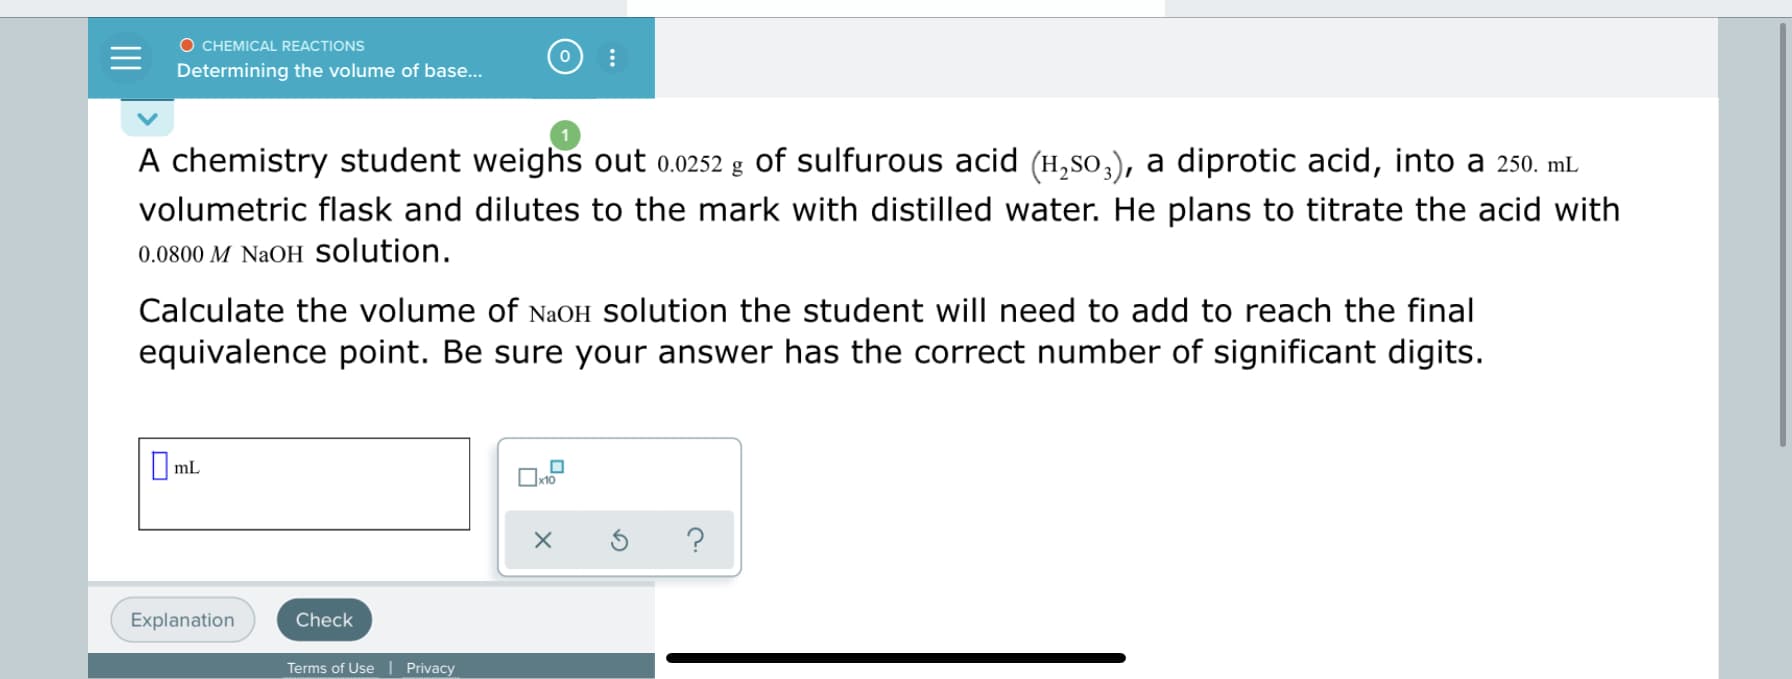 A chemistry student weighs out 0.0252 g of sulfurous acid (H,so,), a diprotic acid, into a 250. mL
volumetric flask and dilutes to the mark with distilled water. He plans to titrate the acid with
0.0800 M NaOH solution.
Calculate the volume of NaOH Solution the student will need to add to reach the final
equivalence point. Be sure your answer has the correct number of significant digits.
O mL
